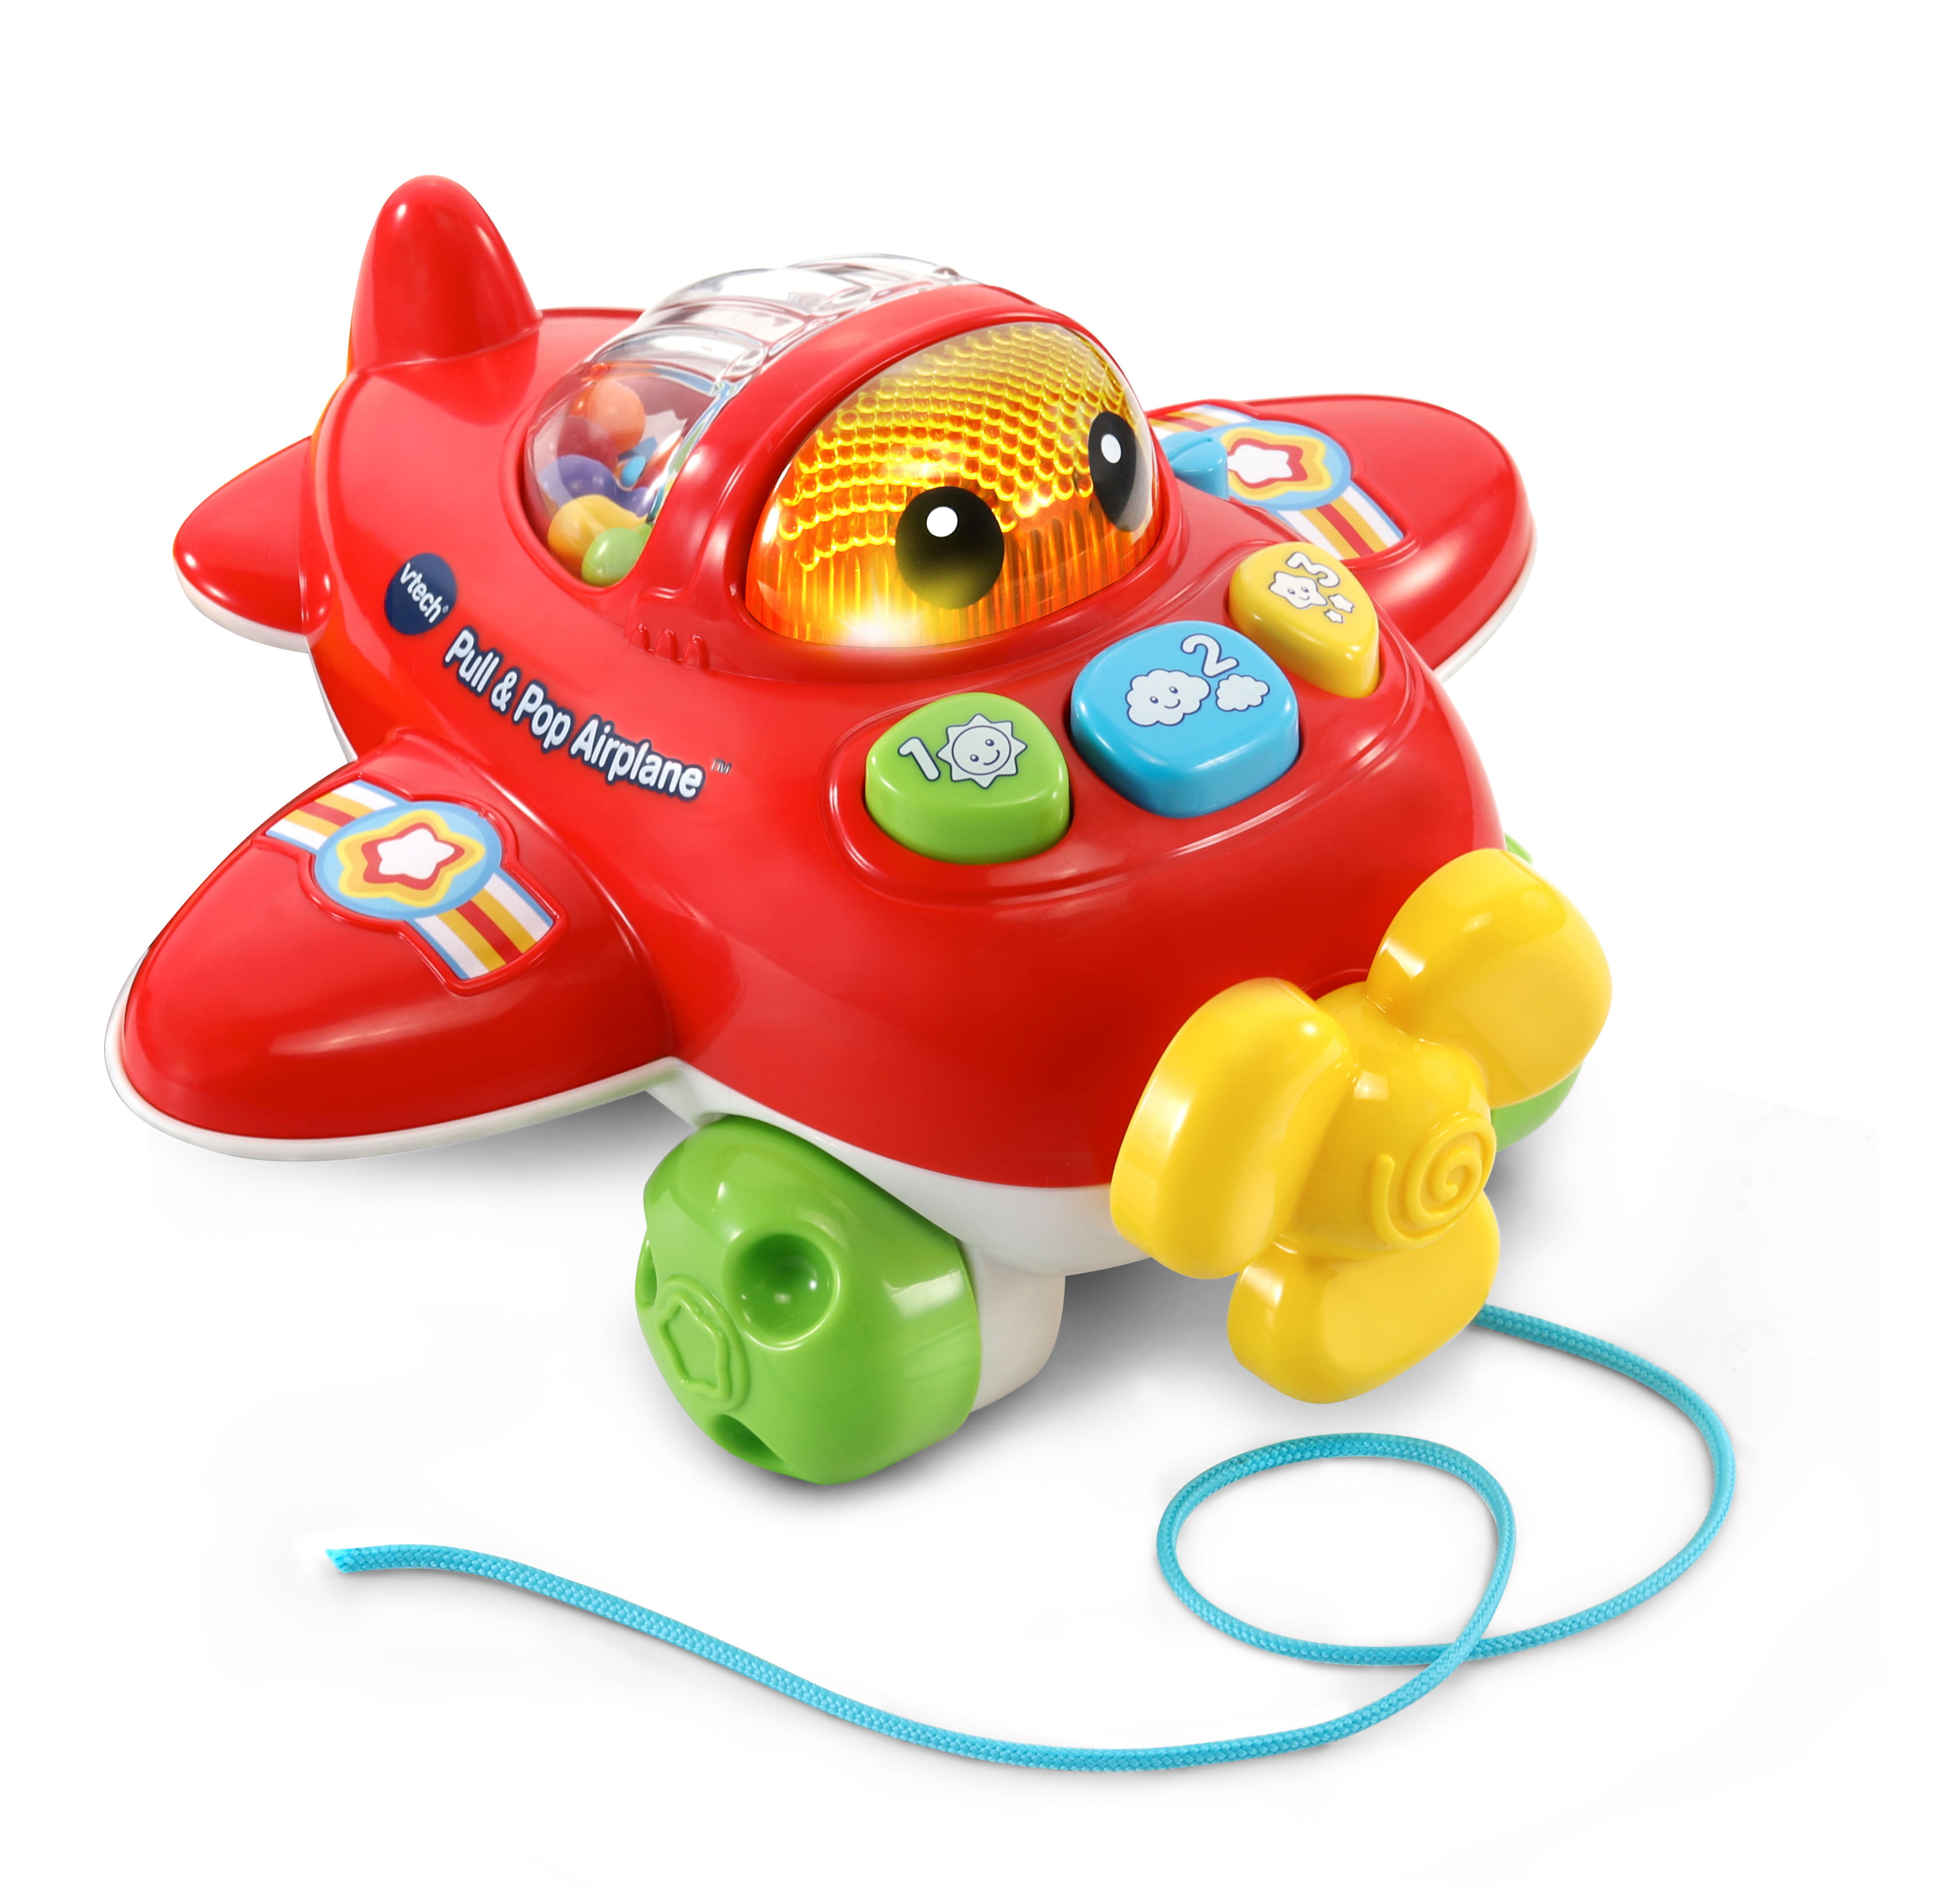 VTech Fly and Learn Airplane With Learning Phrases and Sing-Along Songs 